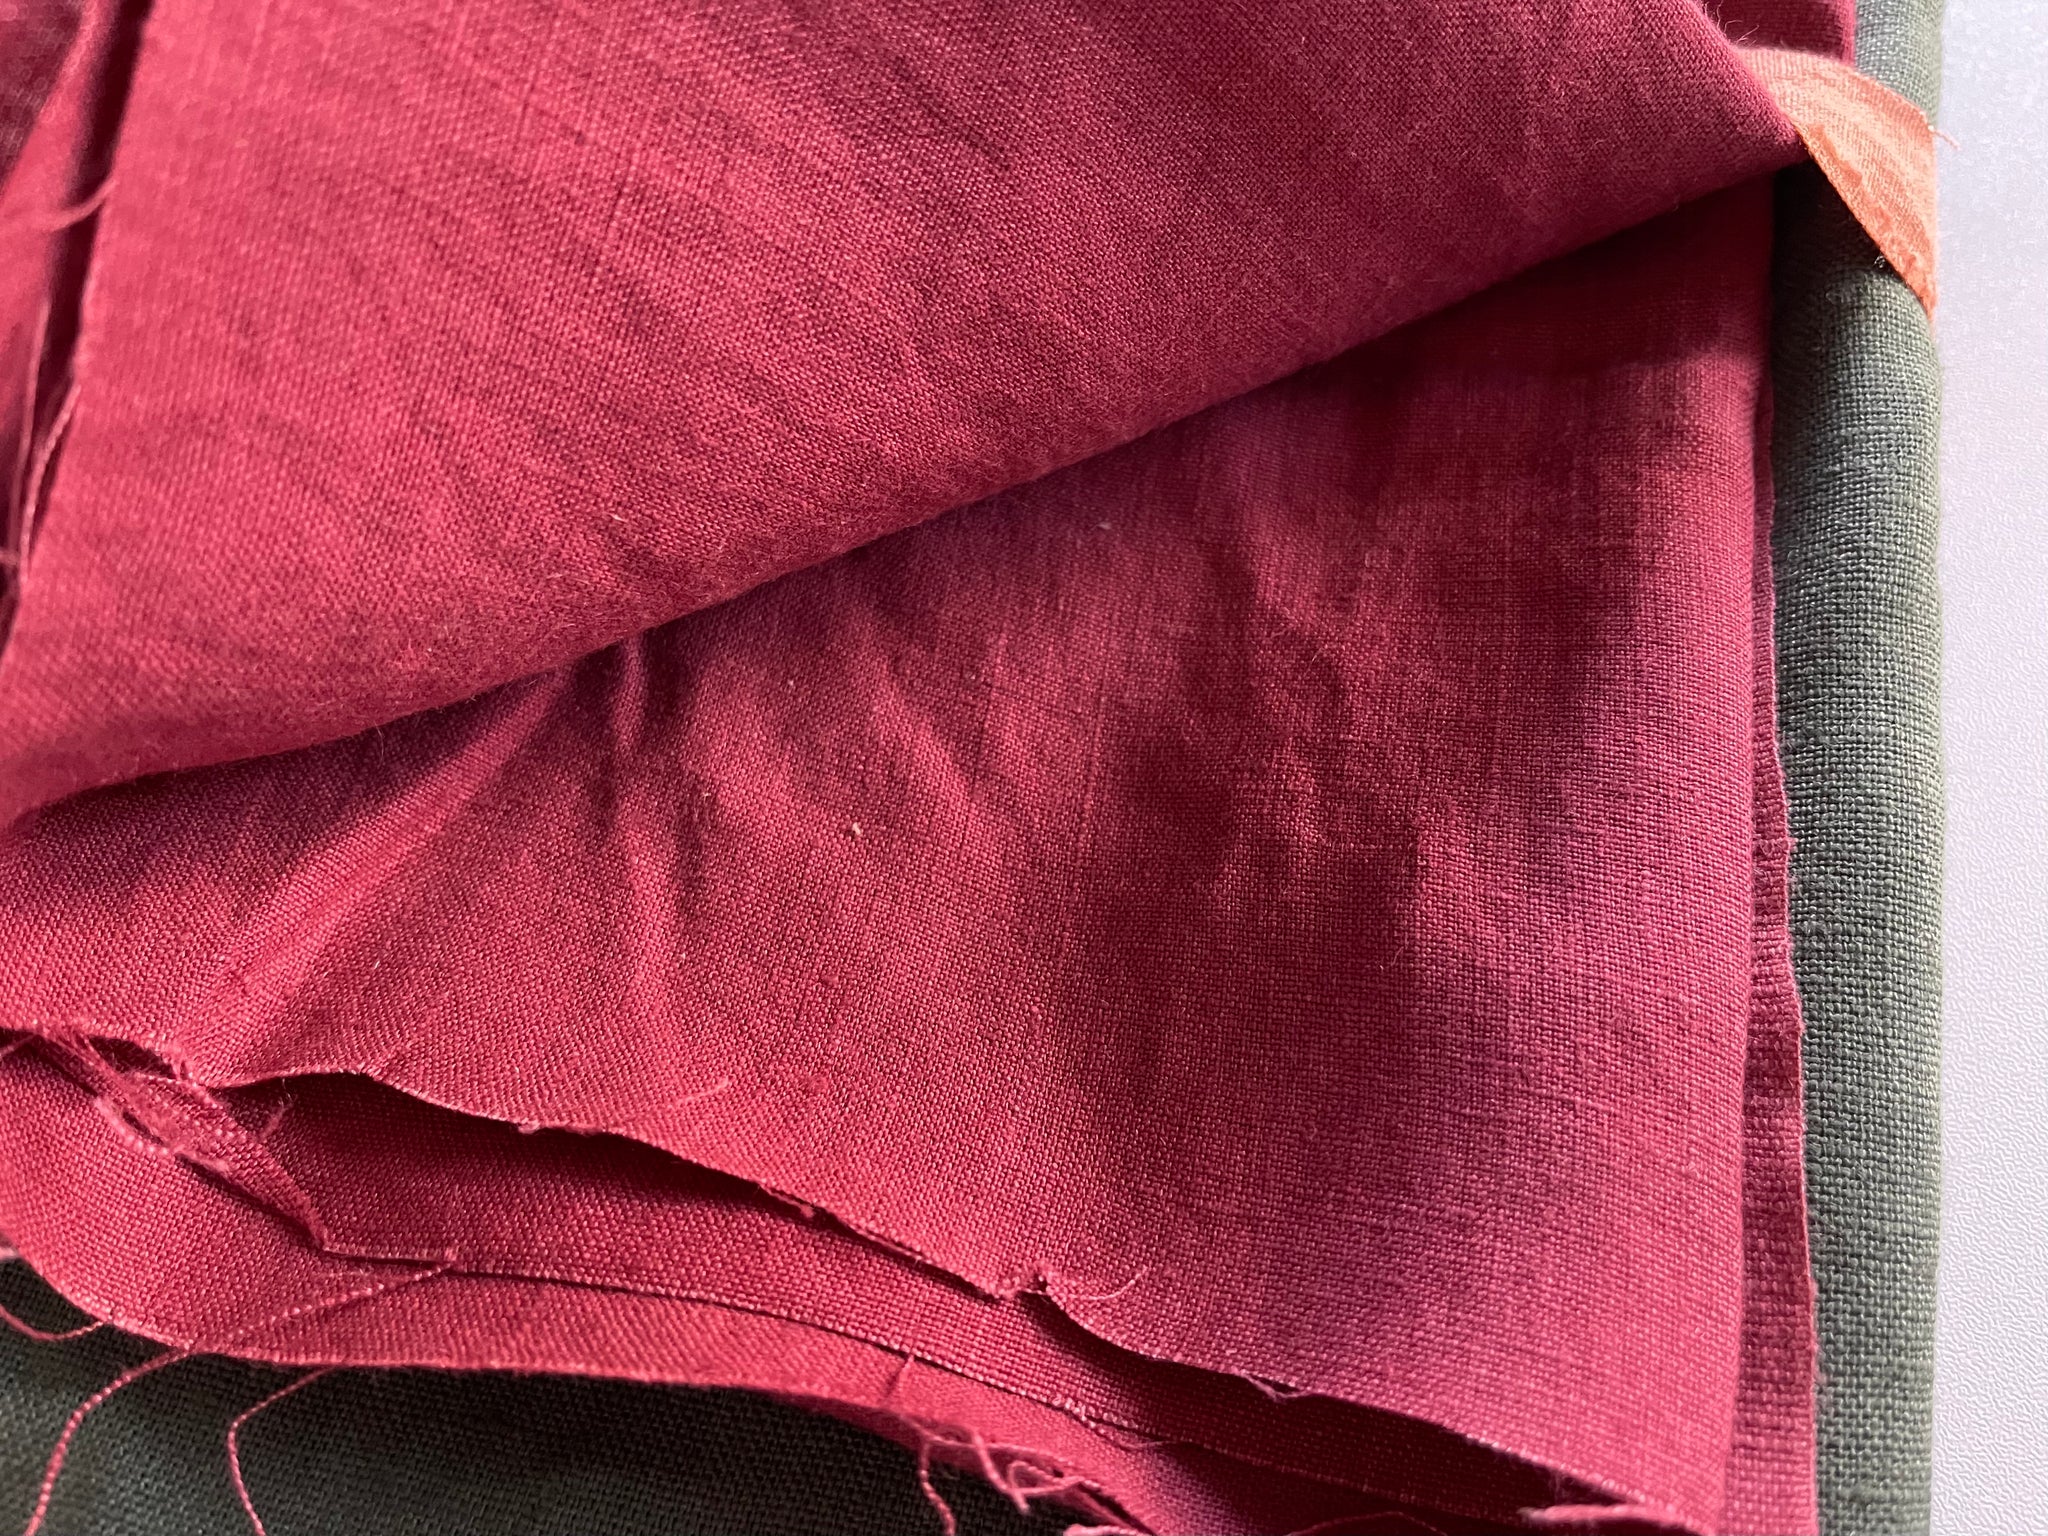 Linen Fabric Remnants - Maroon and Beetle